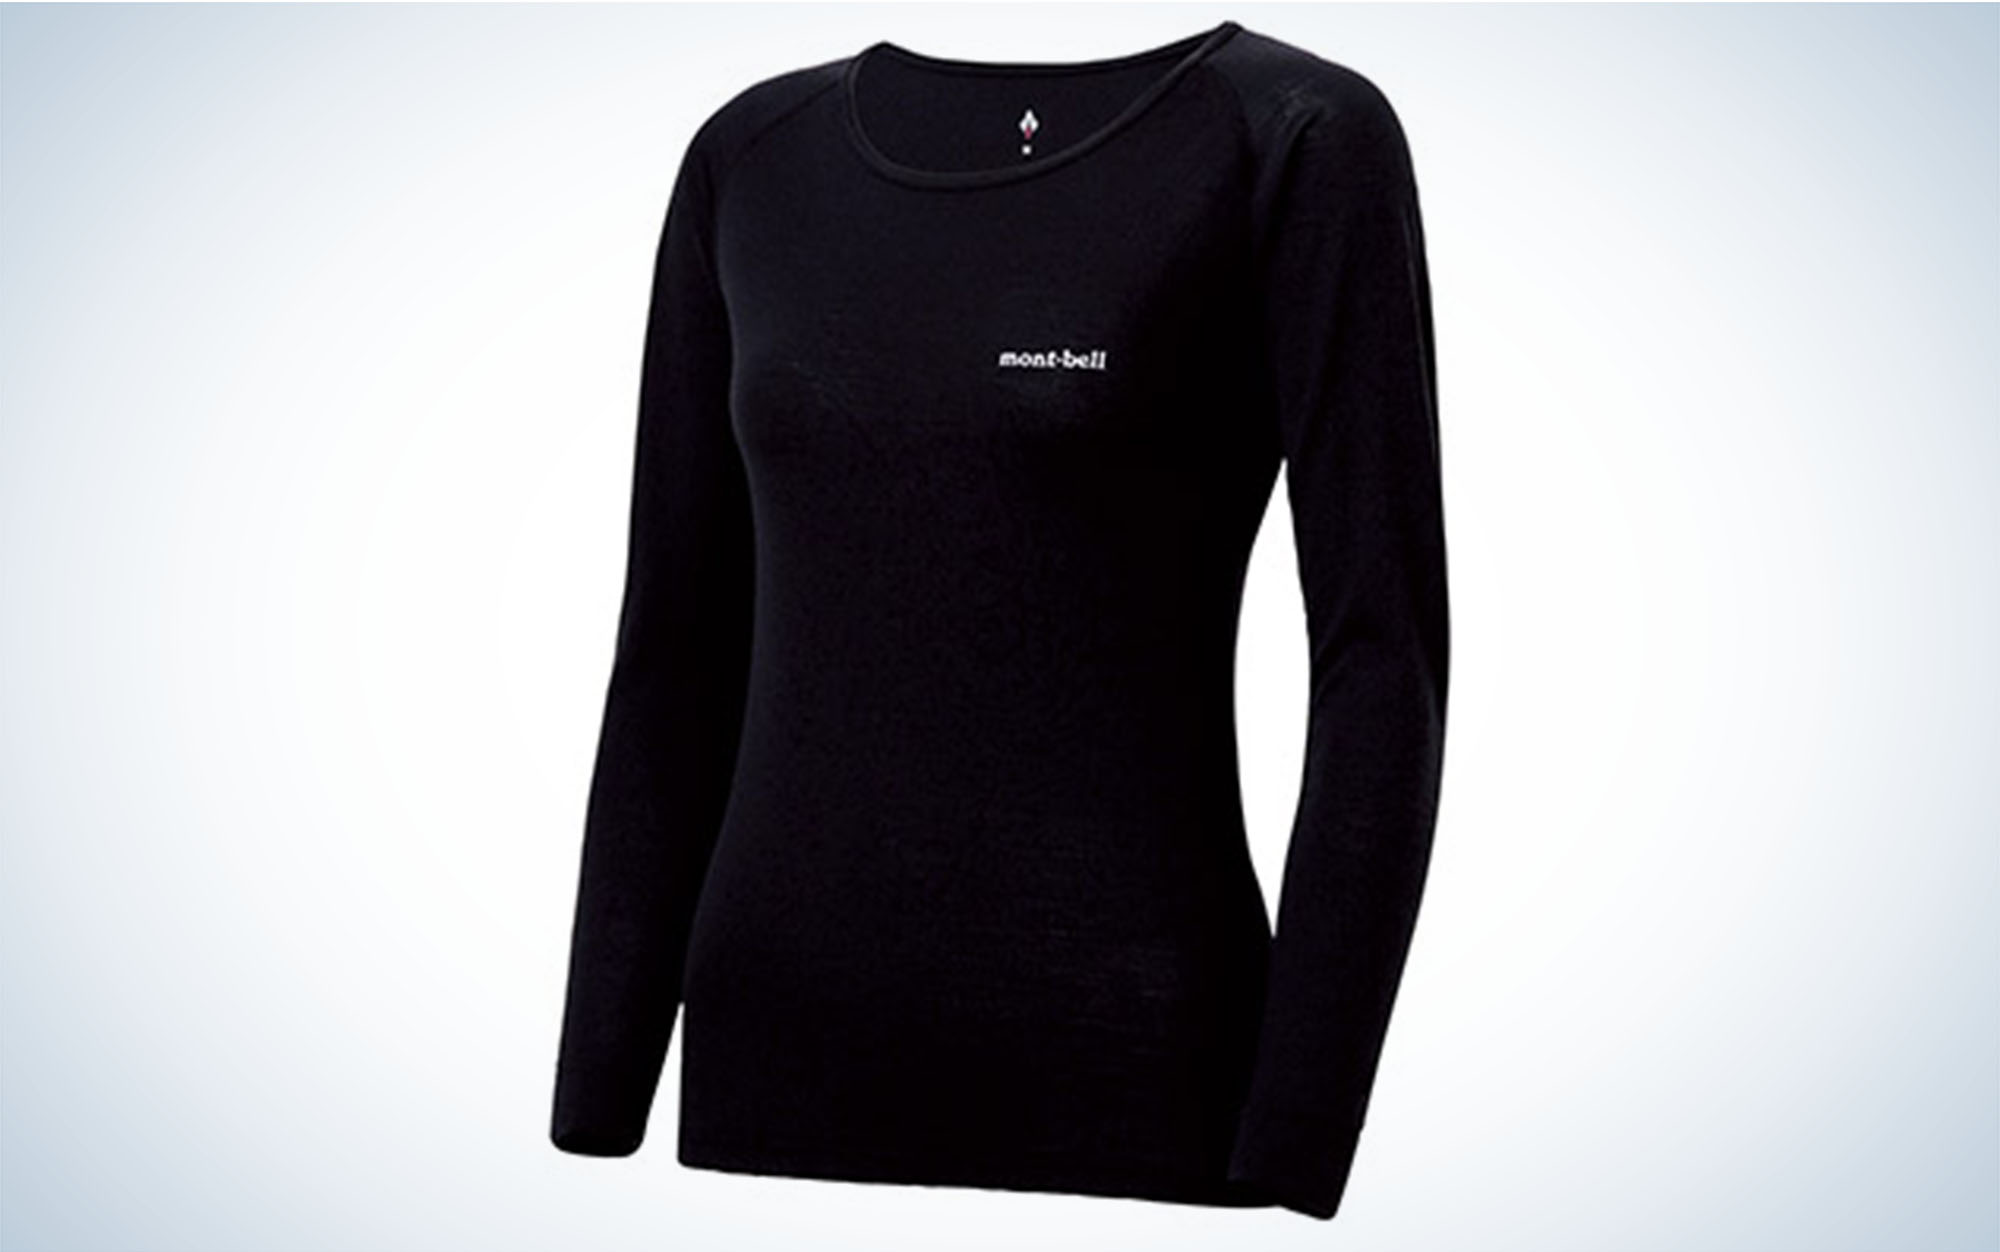 Thermal underwear women • Compare & see prices now »